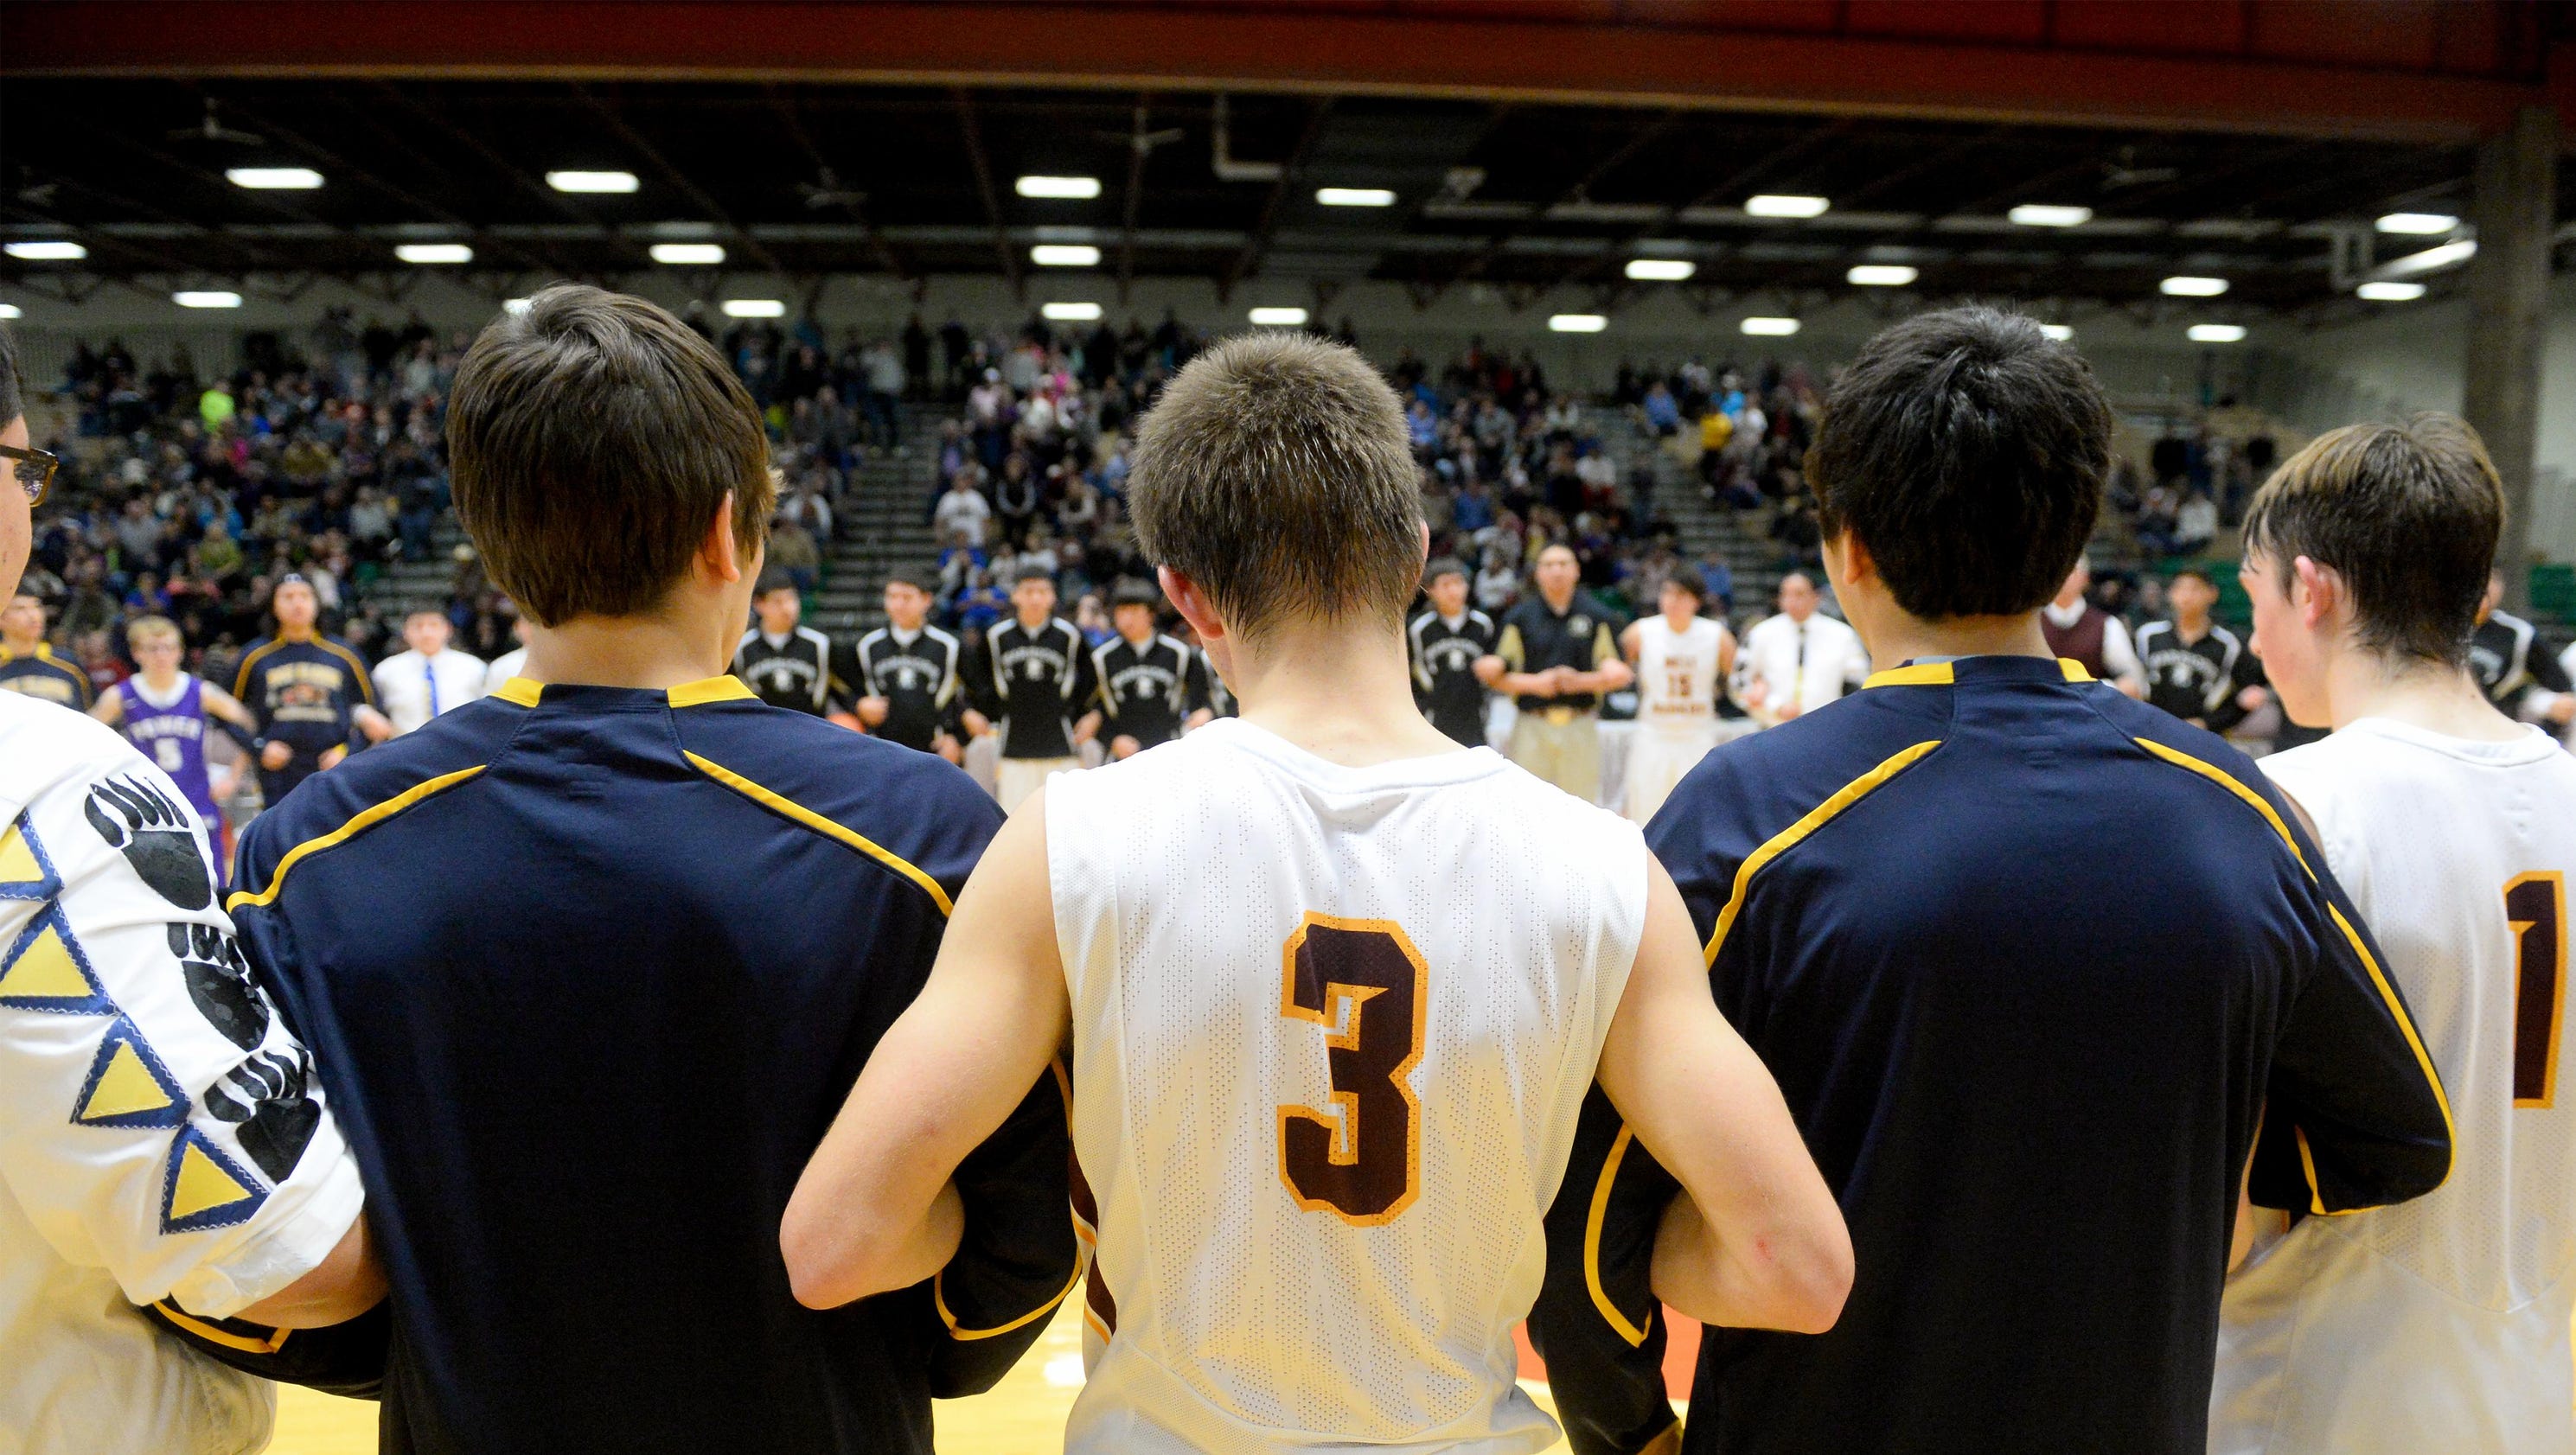 Basketball teams react to segregation comments with solidarity